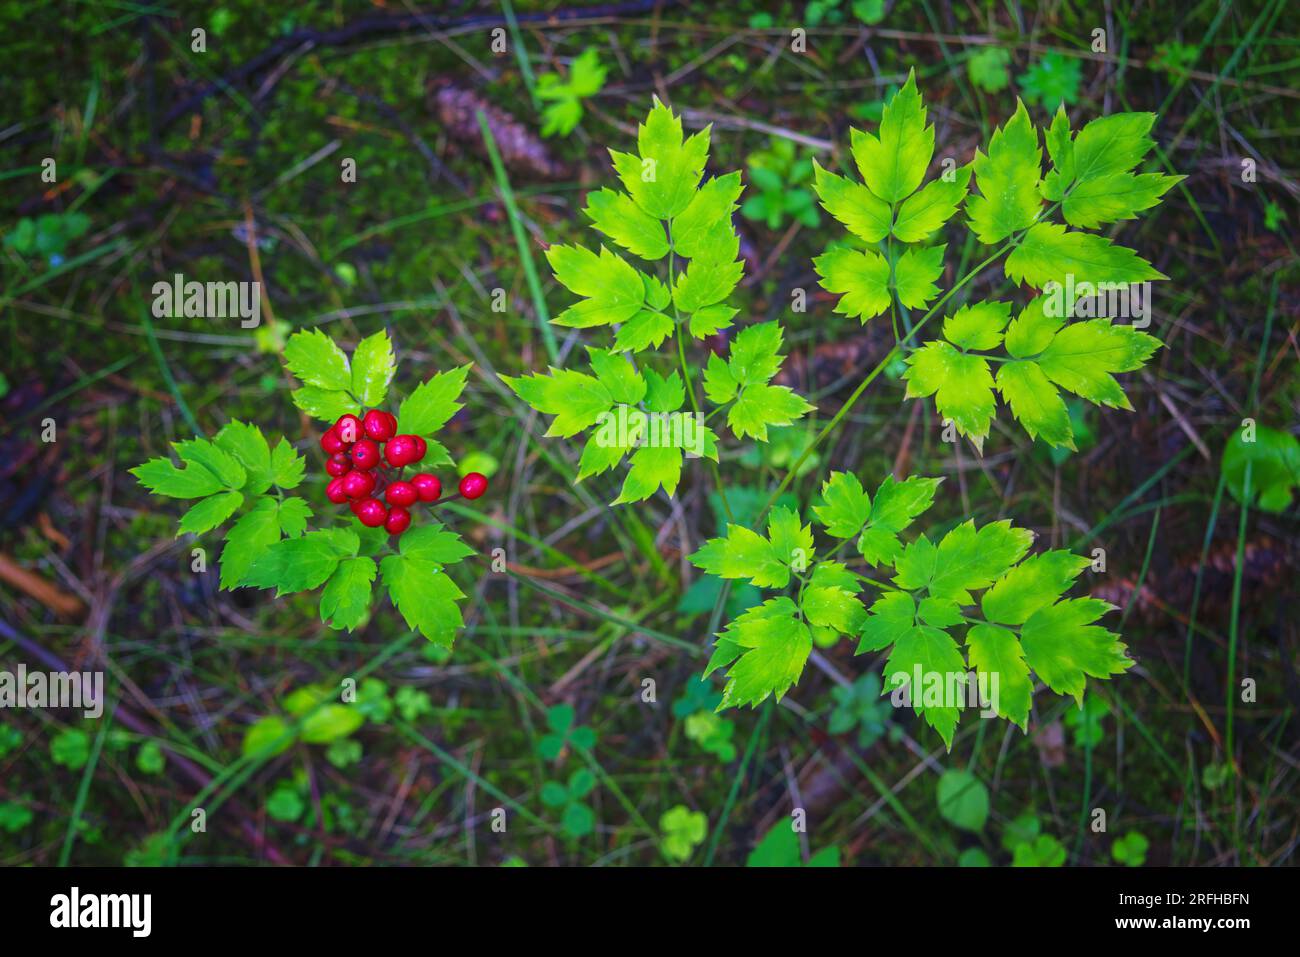 The poisonous red berry from baneberry plant Actaea rubra in a forest close-up. Stock Photo